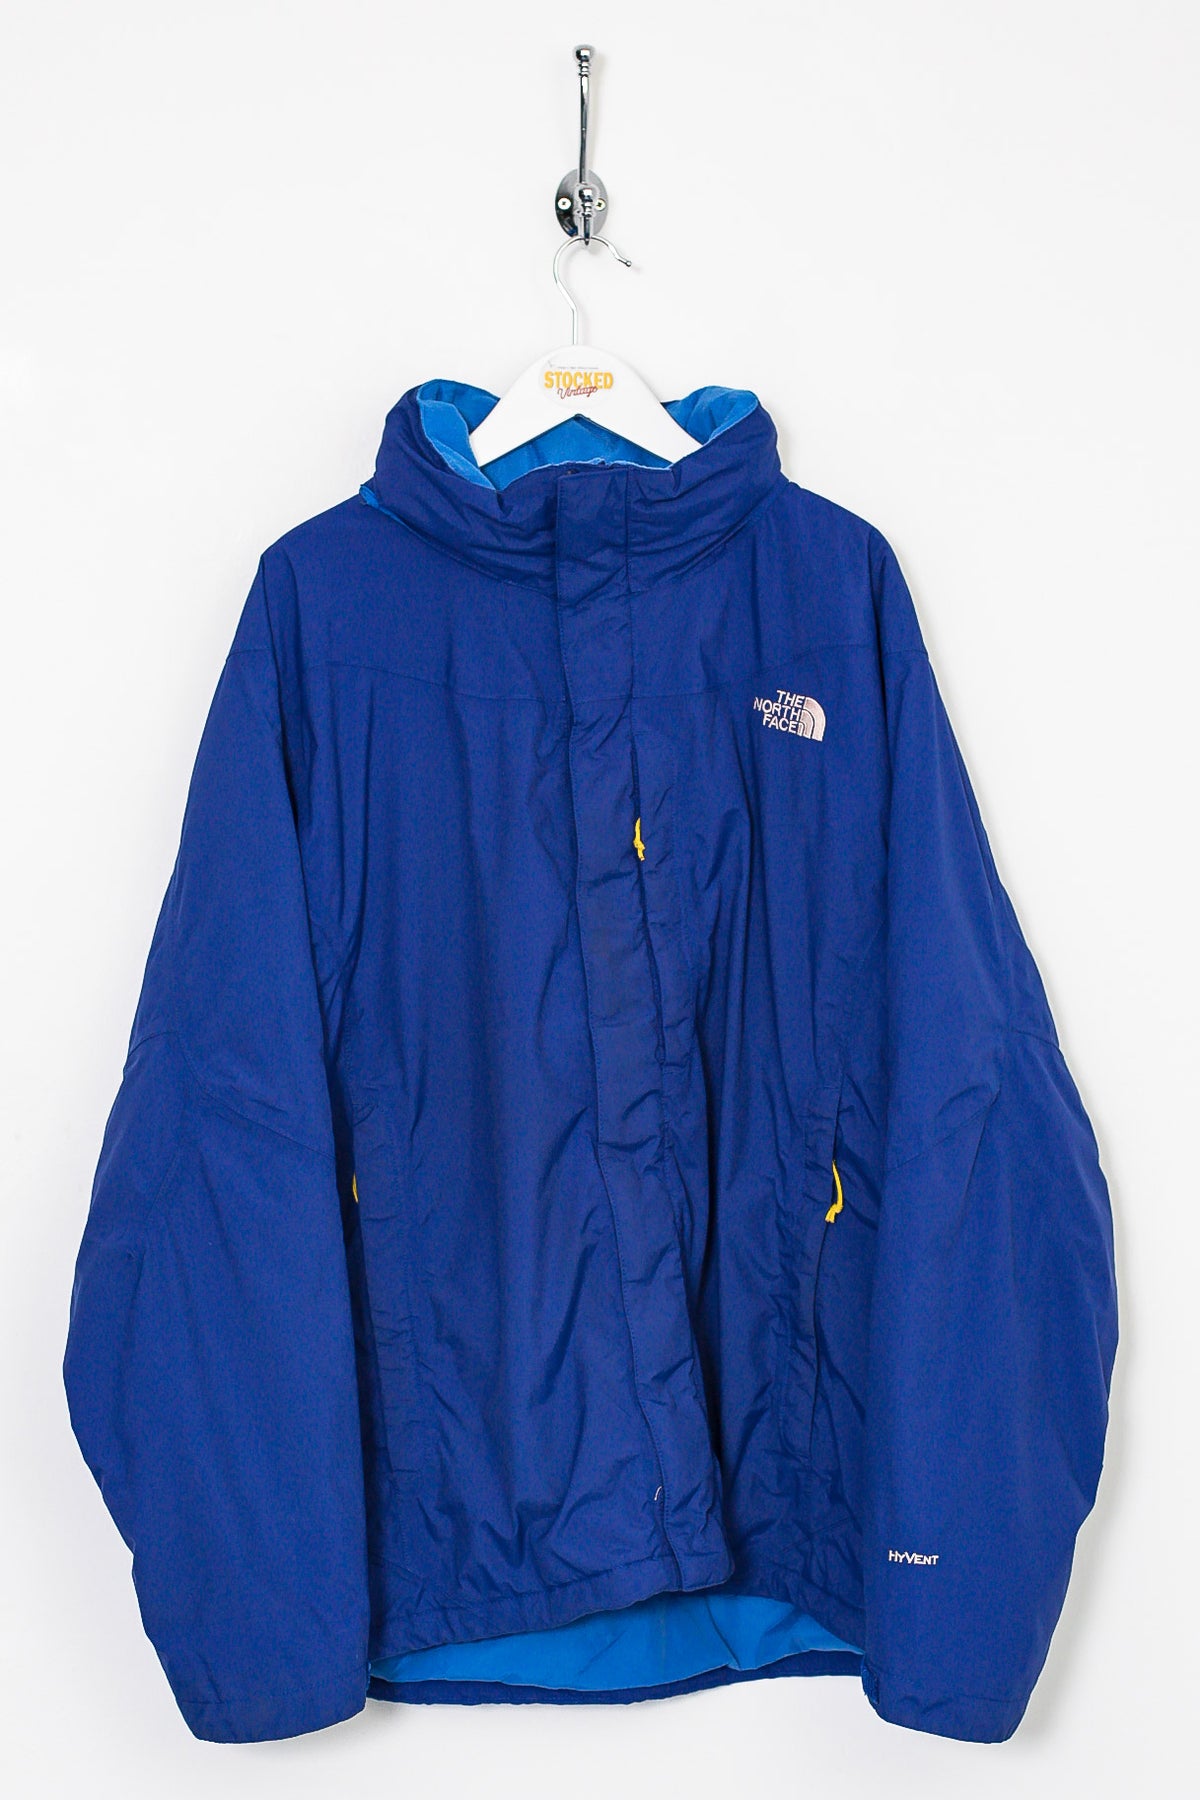 The North Face Hyvent Jacket (XL) – Stocked Vintage